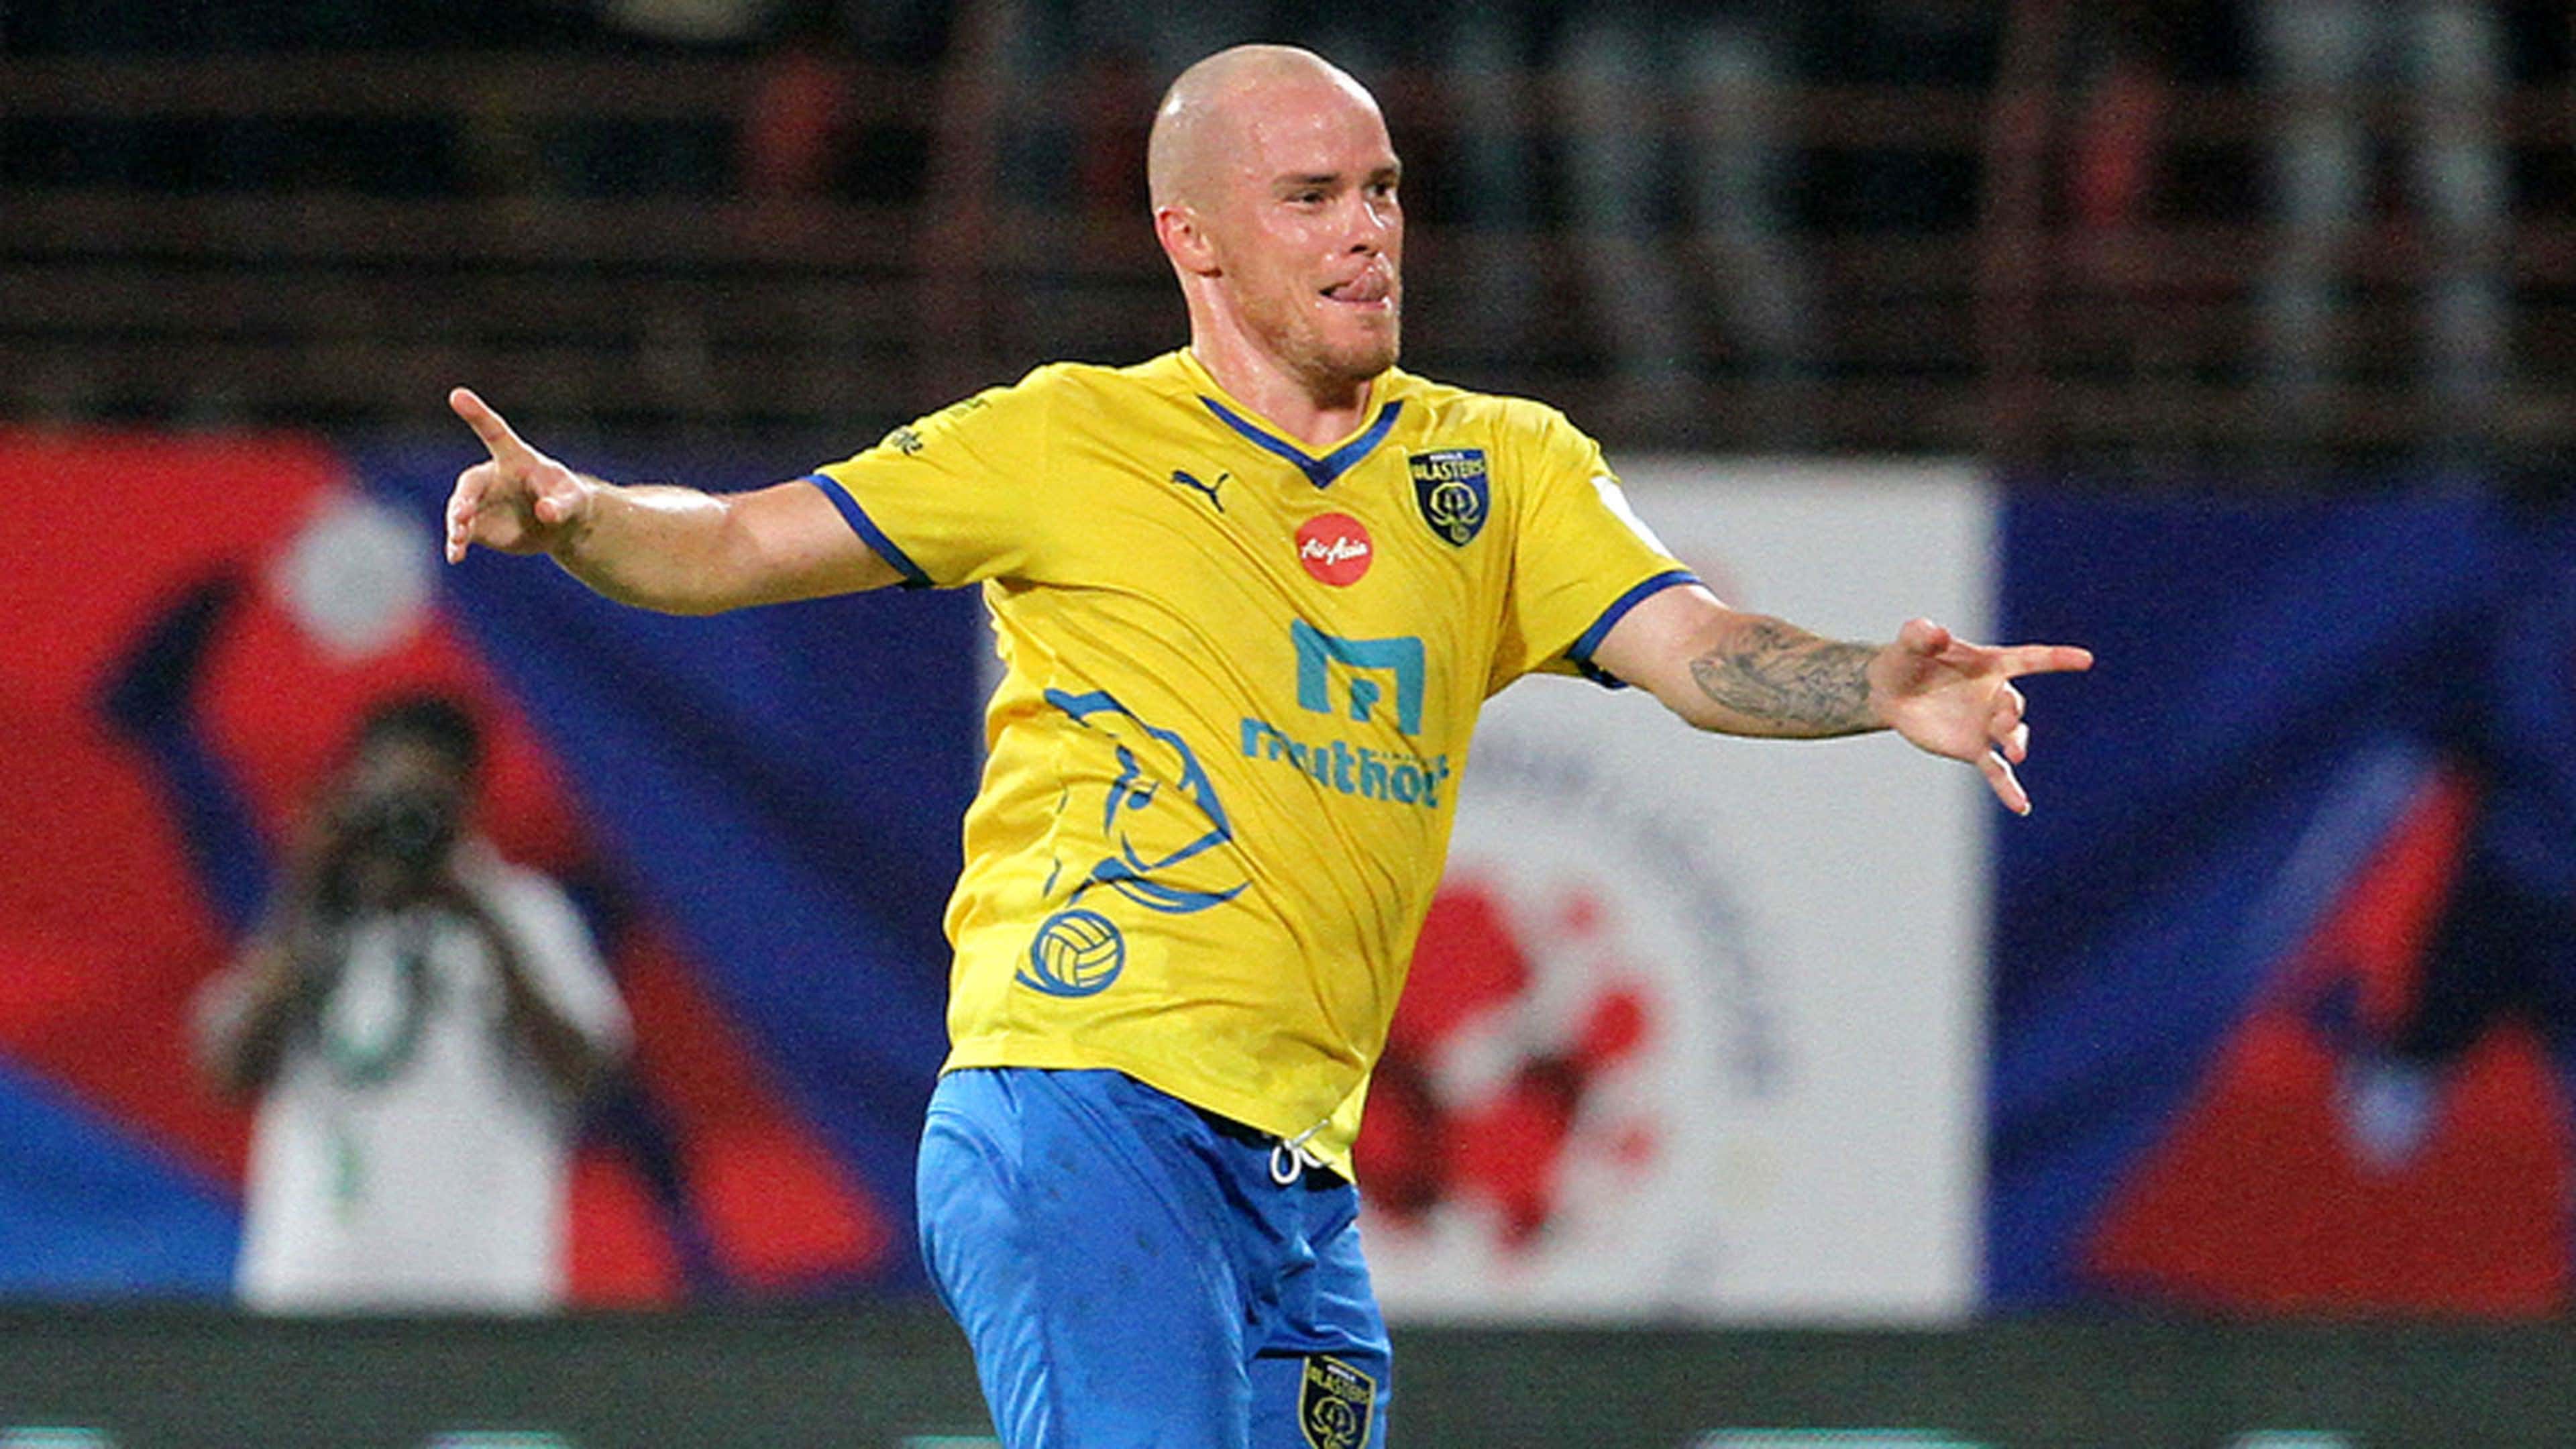 Iain Hume of Kerala Blasters FC celebrates a goal during ISL match against FC Pune City